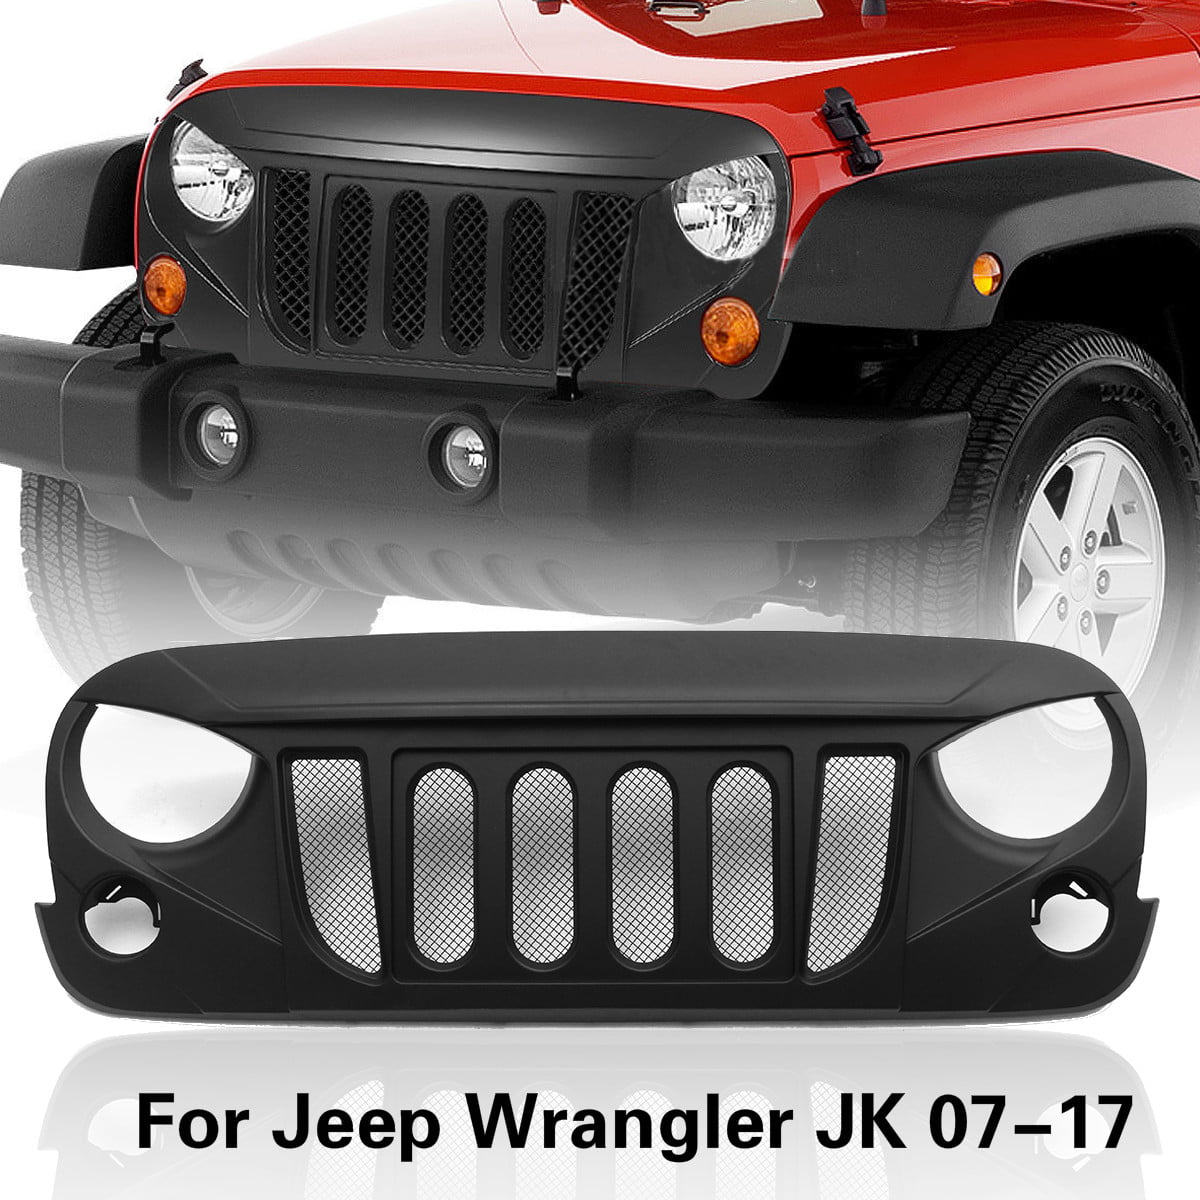 For Jeep Wrangler JK 07-17 Gloss Black/Matte Black Angry Skull 2 Front  Package Mesh Grille Grid Grill | Walmart Canada